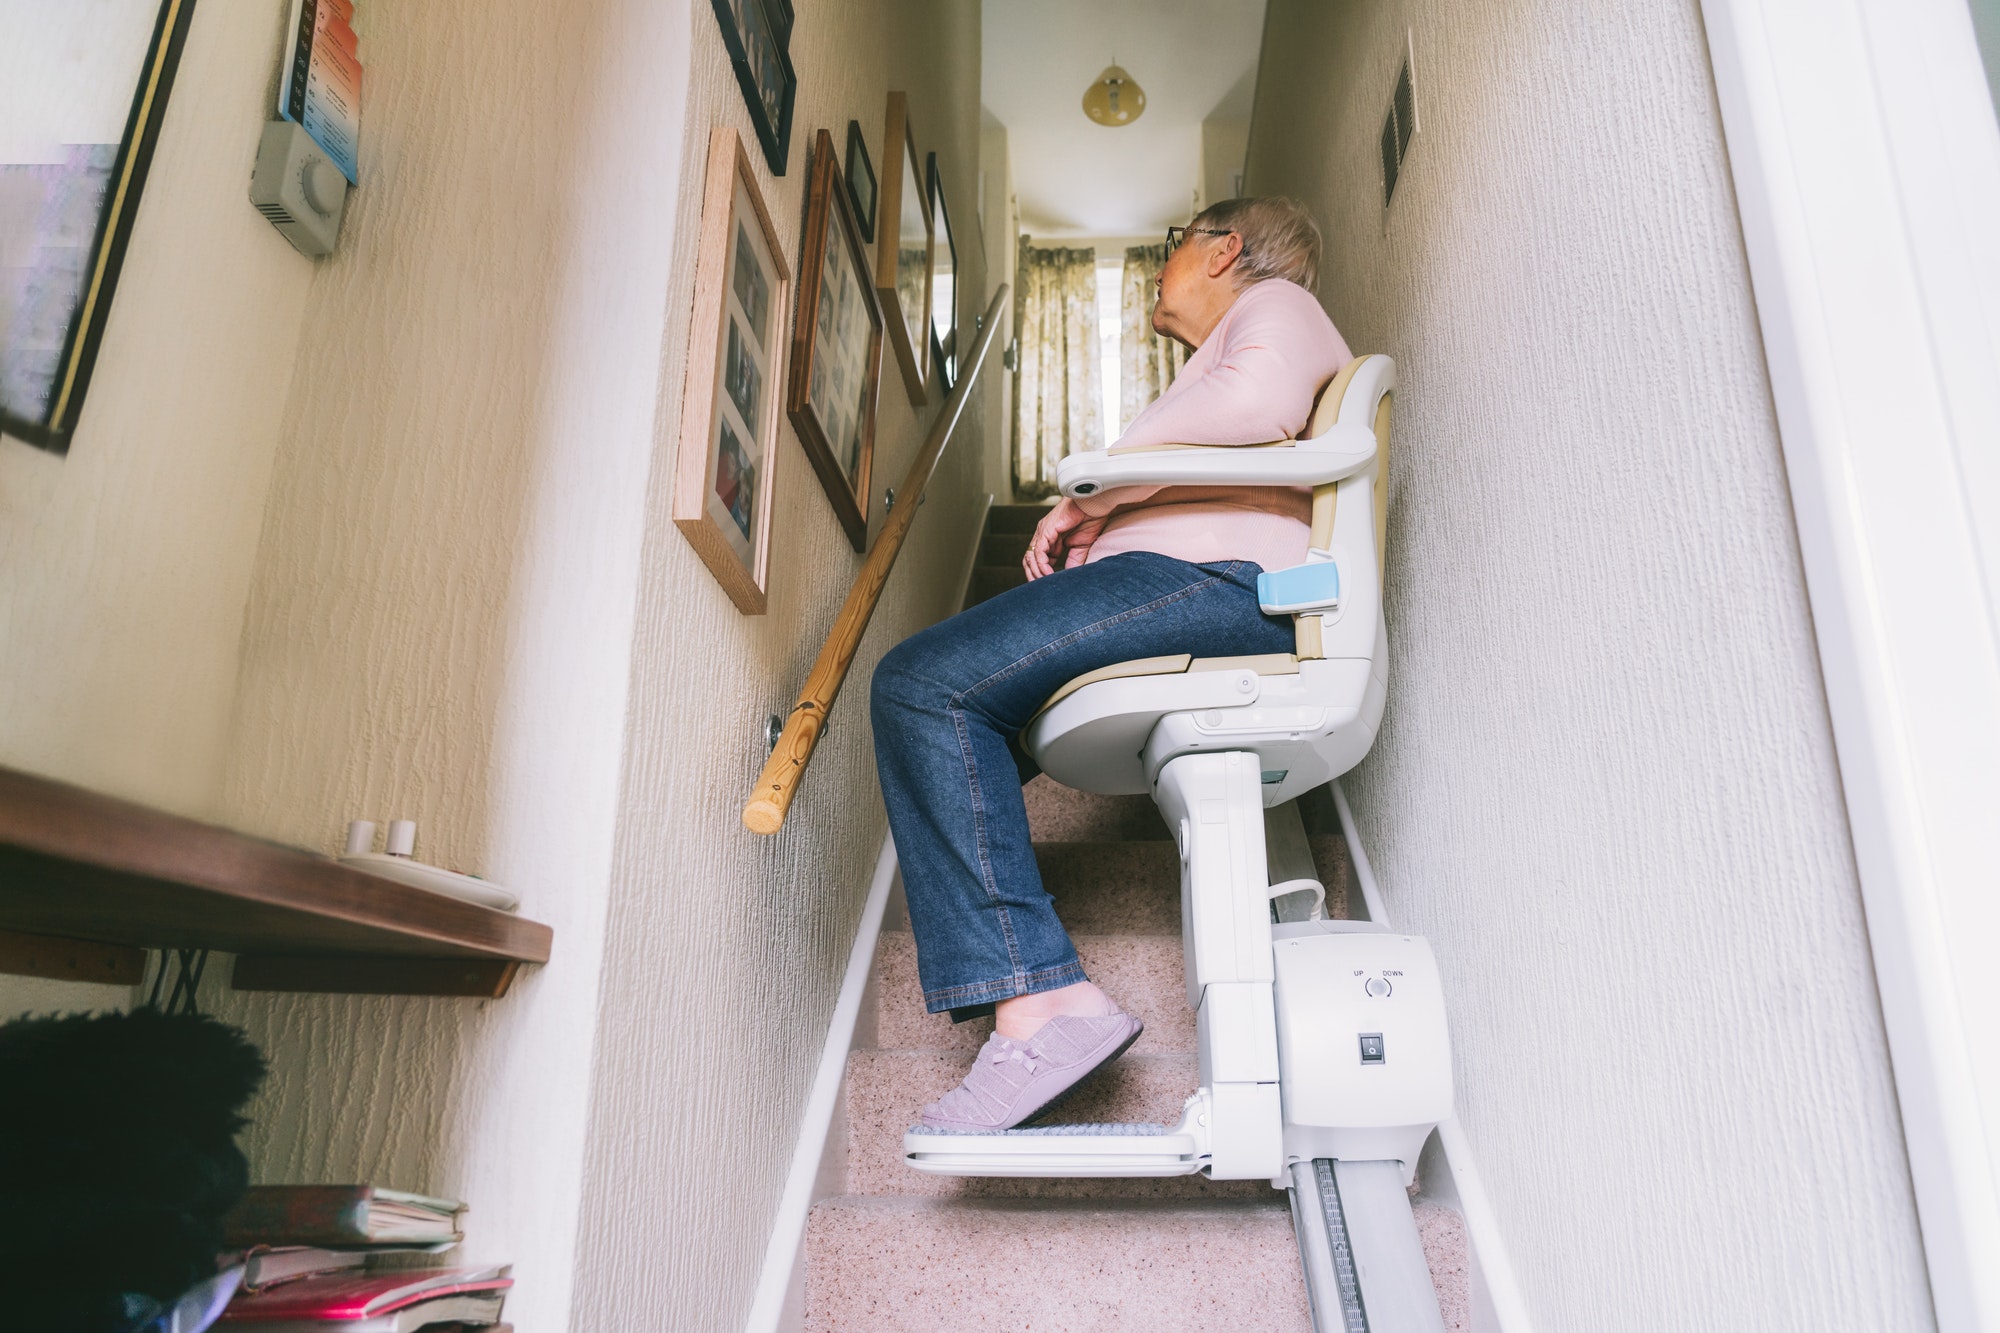 Senior woman using automatic stairlift on a staircase at her home. Medical Stairlift for disabled